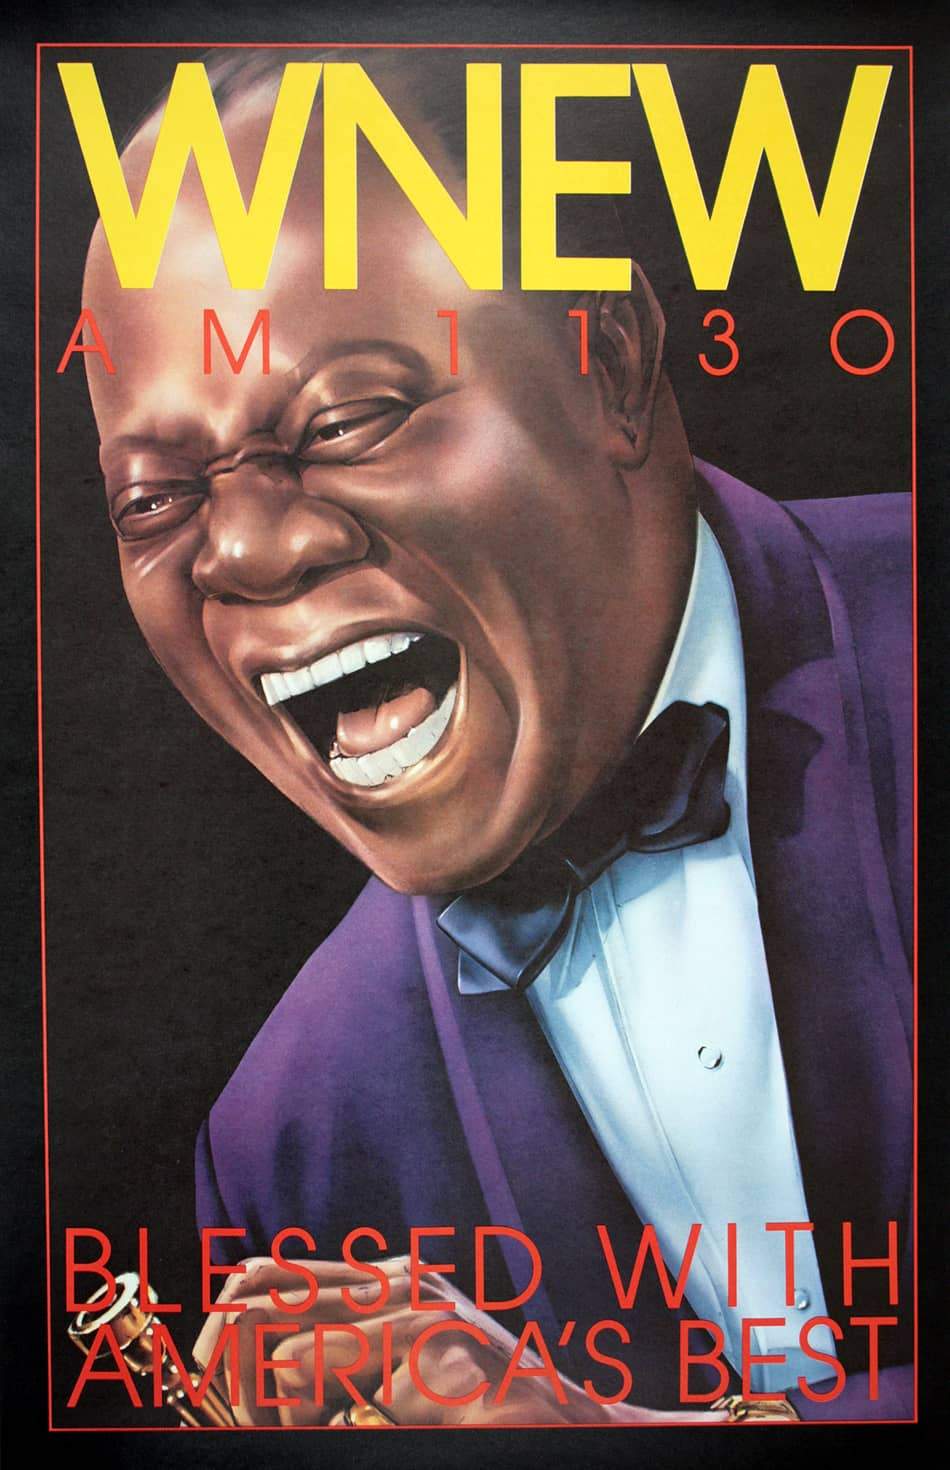 Louis Armstrong Original Vintage Poster for WNEW Jazz Radio by Bob Lee Hickson 1973